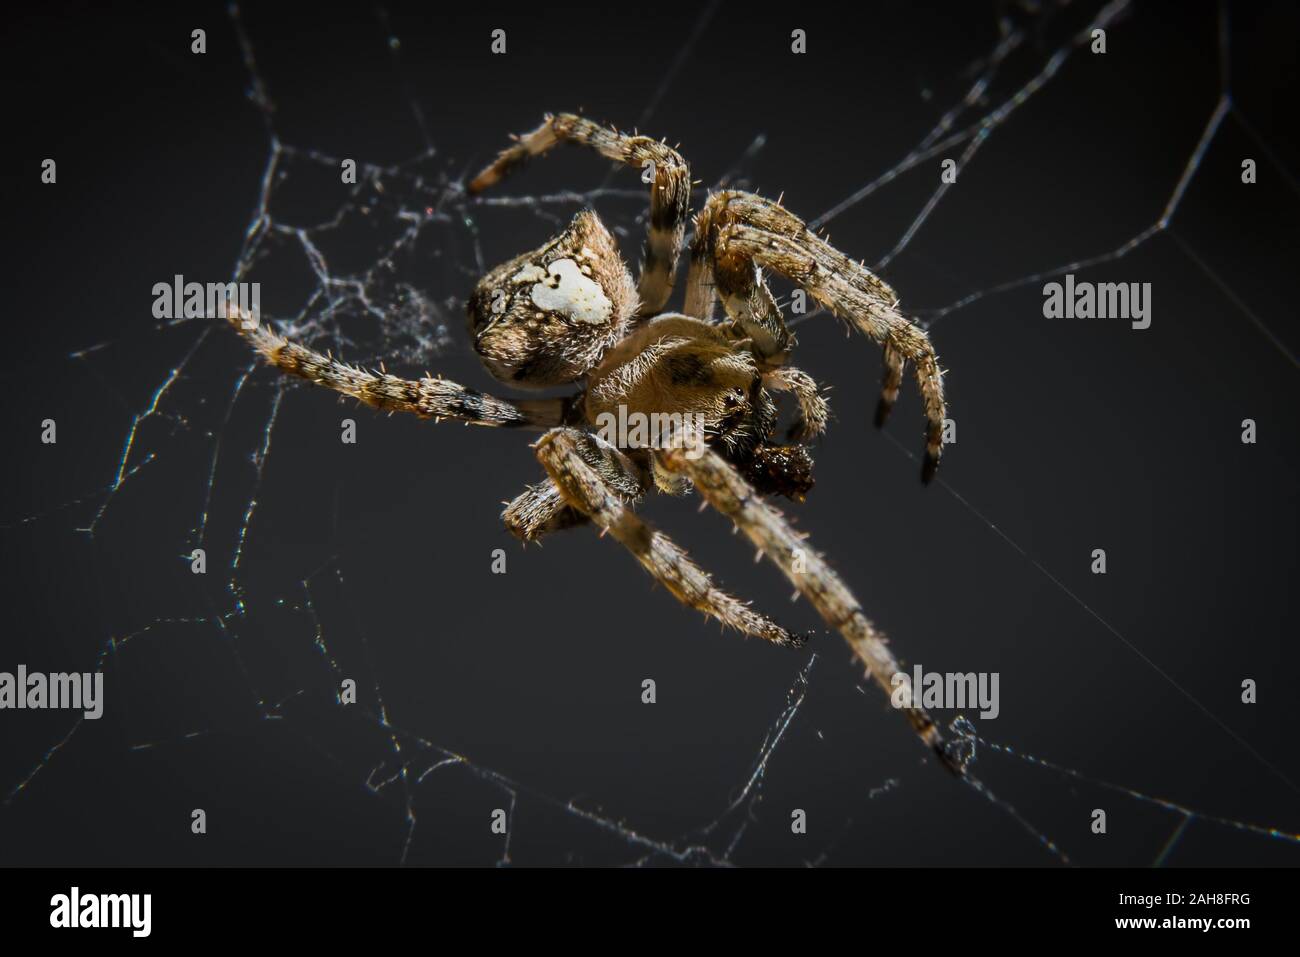 Close up of a brown spider on its web, against a black background Stock Photo